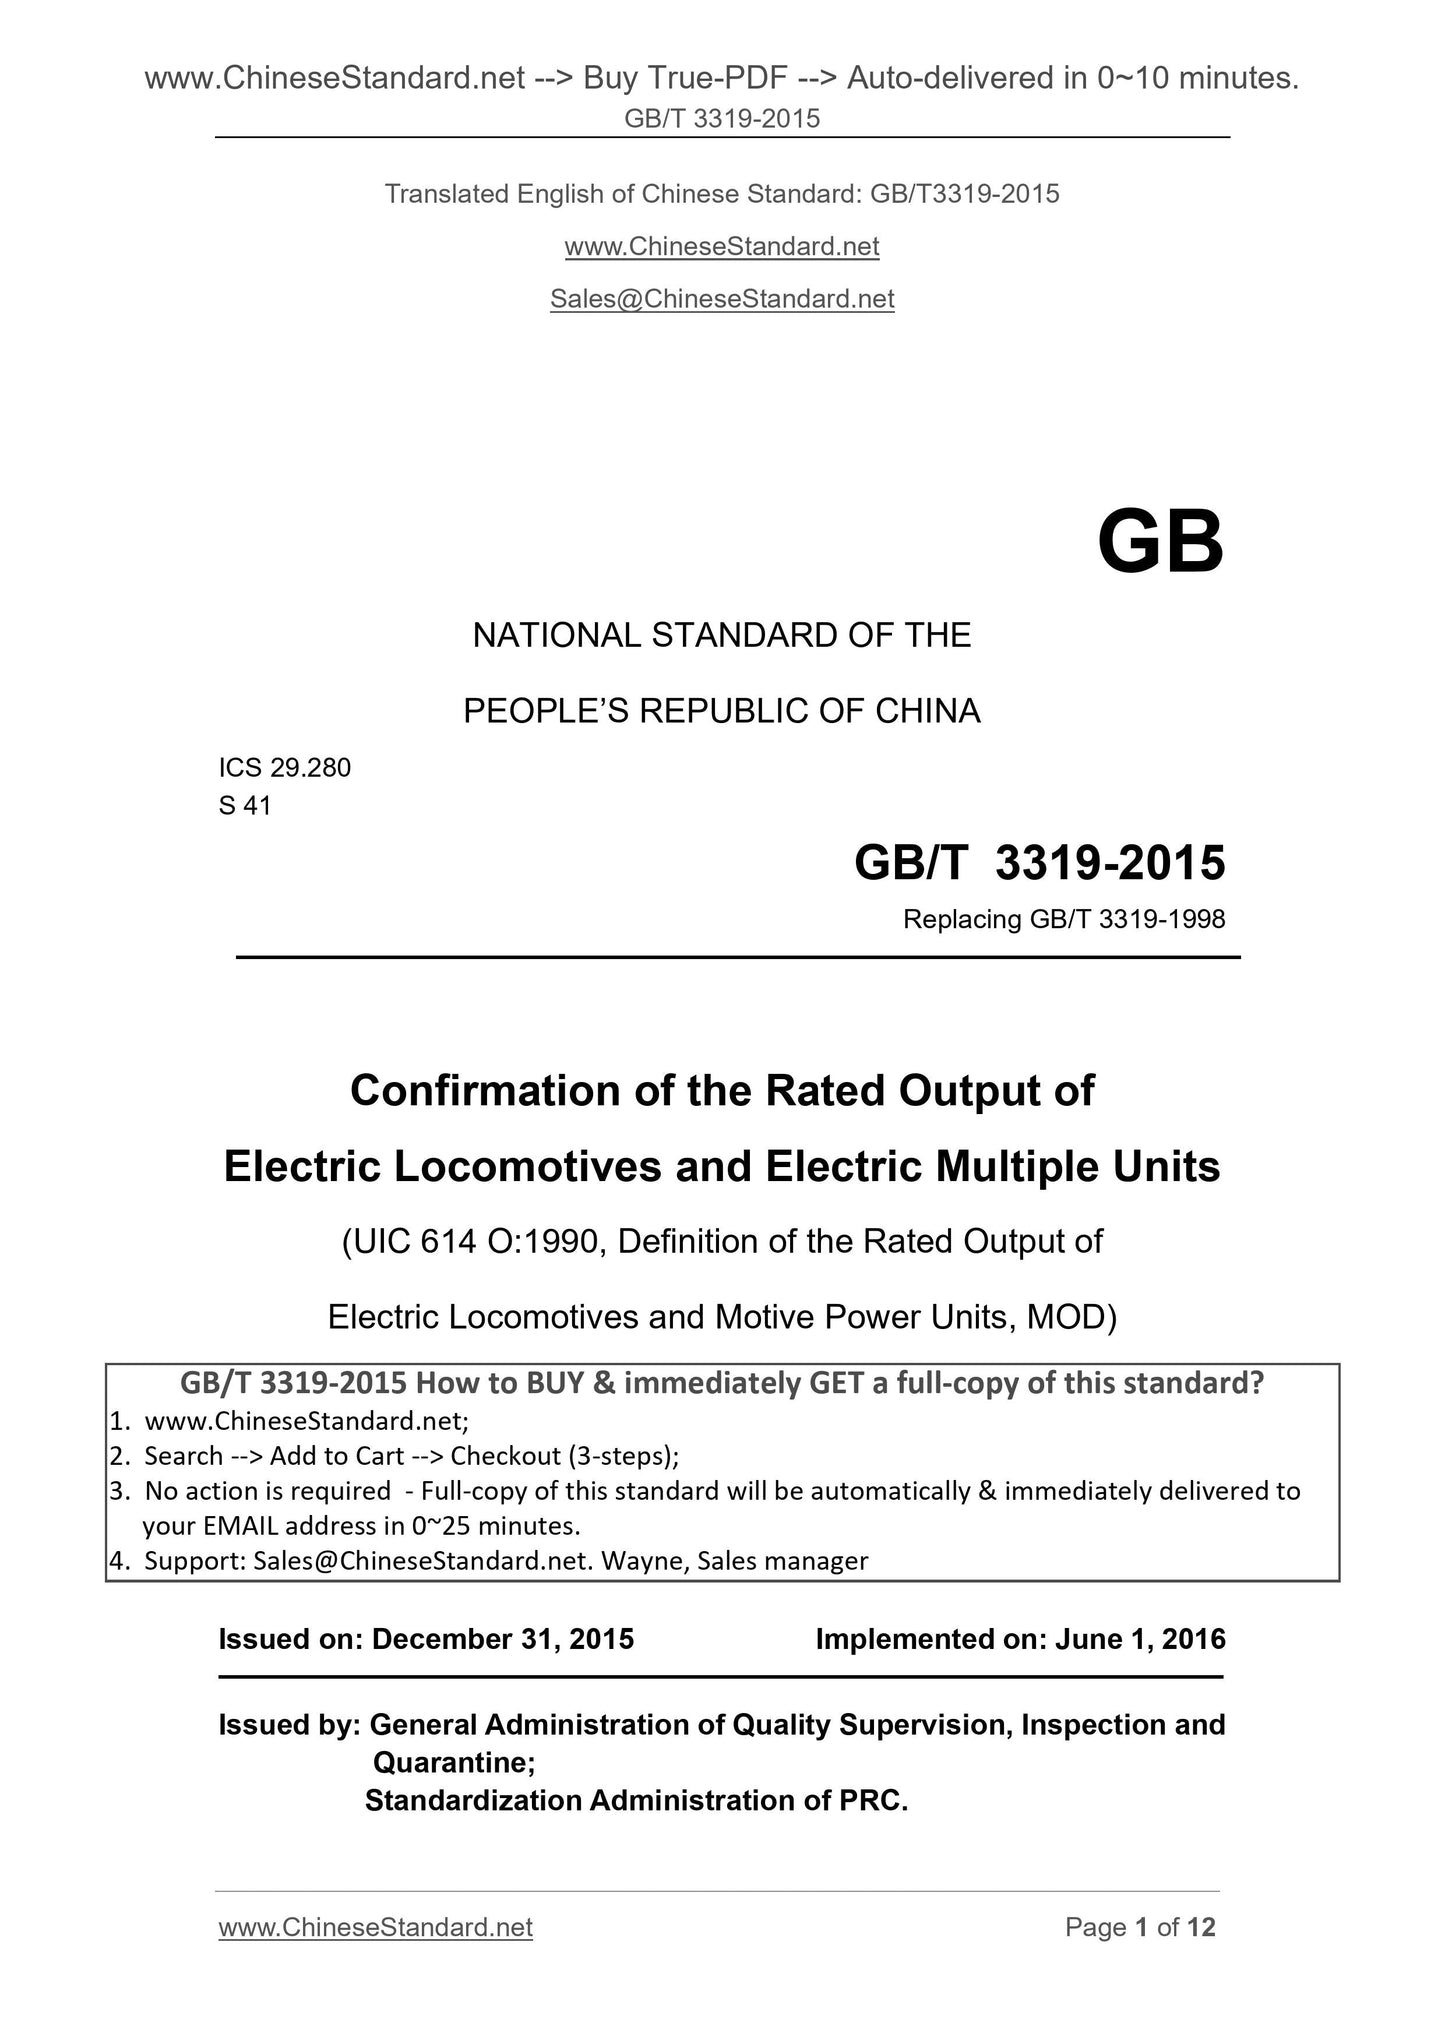 GB/T 3319-2015 Page 1